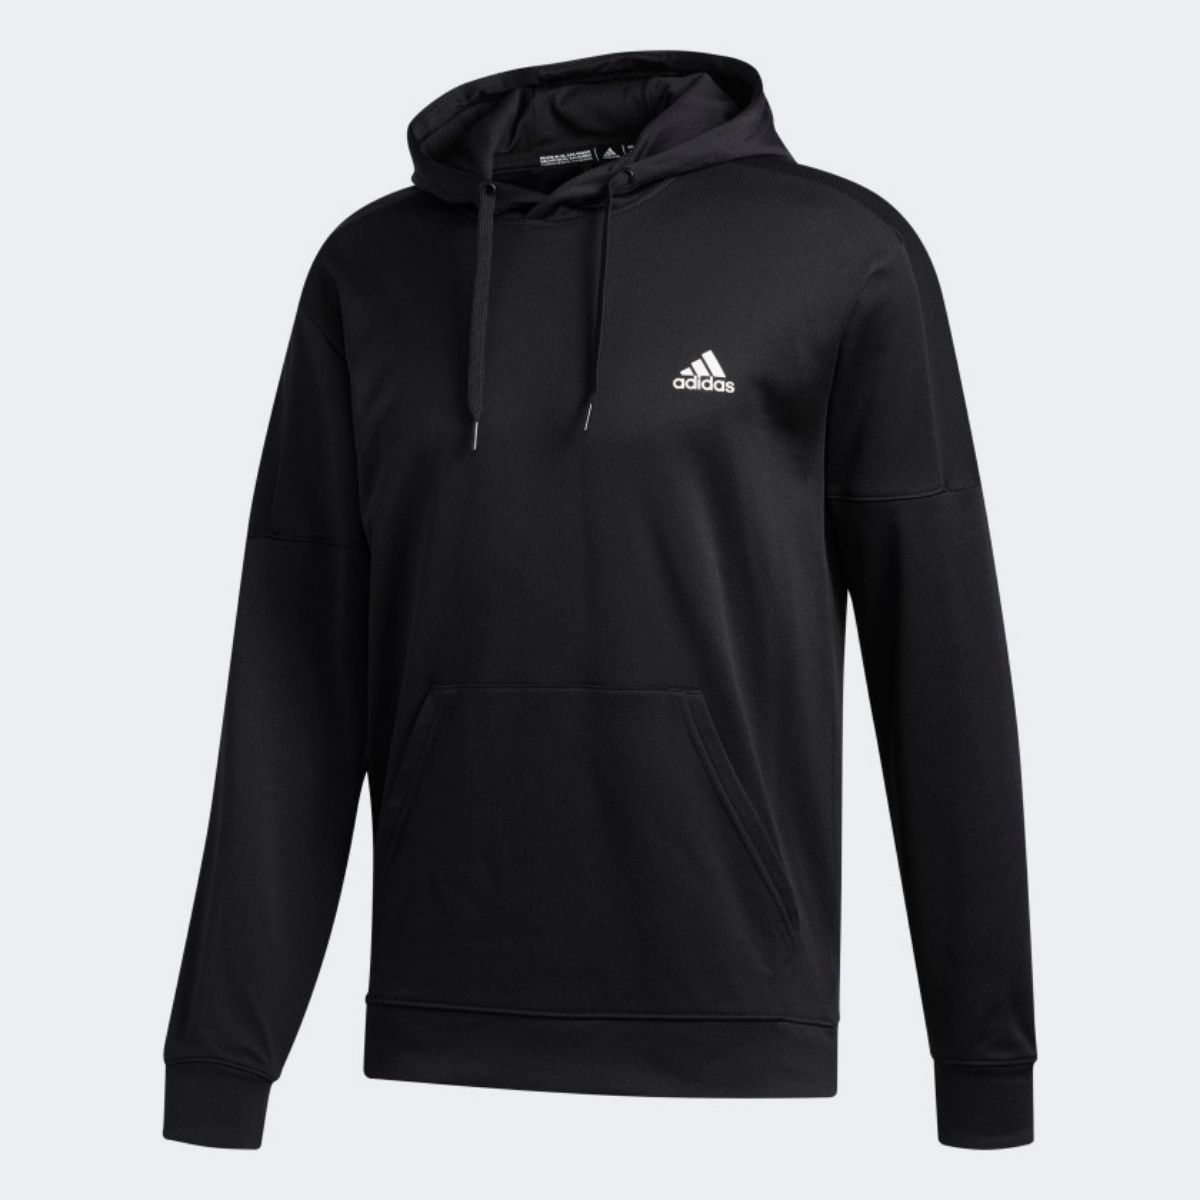 The Best Sale Items from Adidas' Apparel Under $60 - BroBible